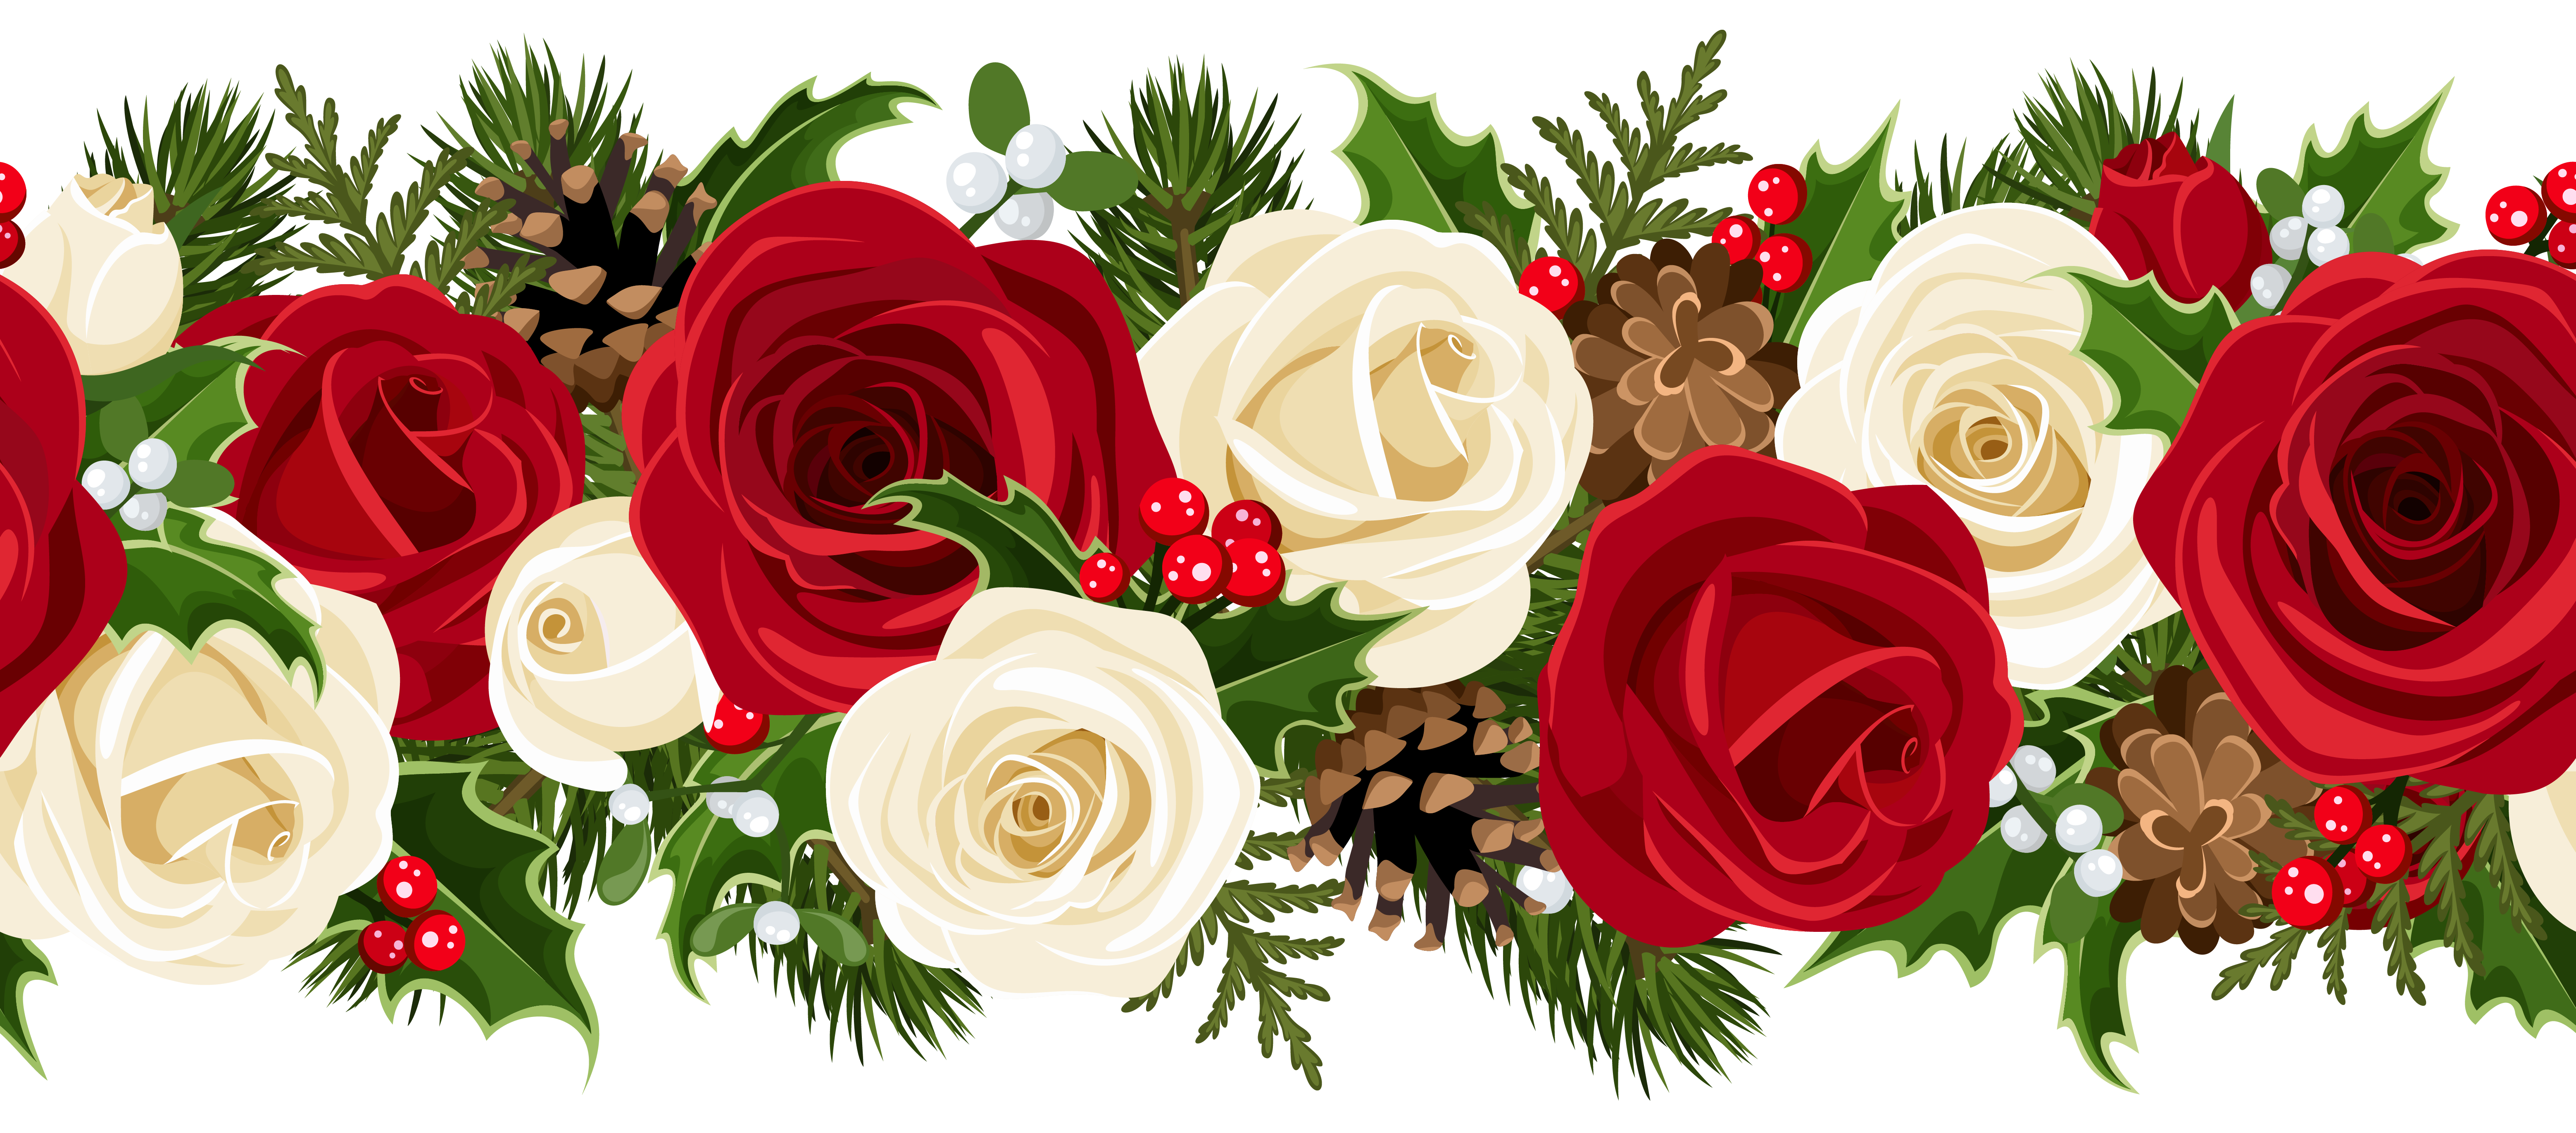 Garland clipart poinsettia. Christmas rose png clip